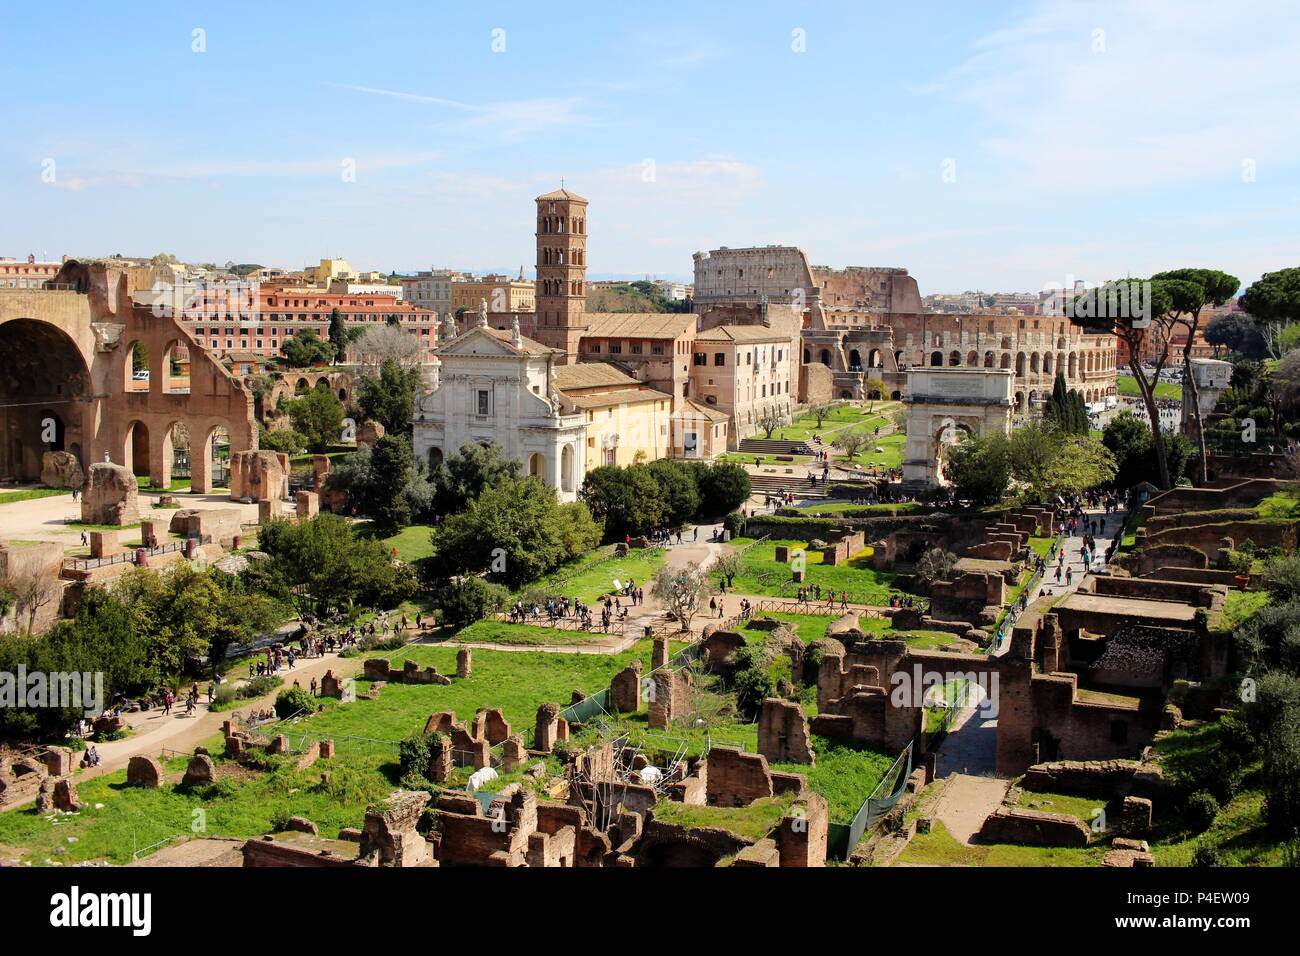 Spring sunshine at the Roman Forum - the heart of ancient Rome - with the Colosseum in the background Stock Photo